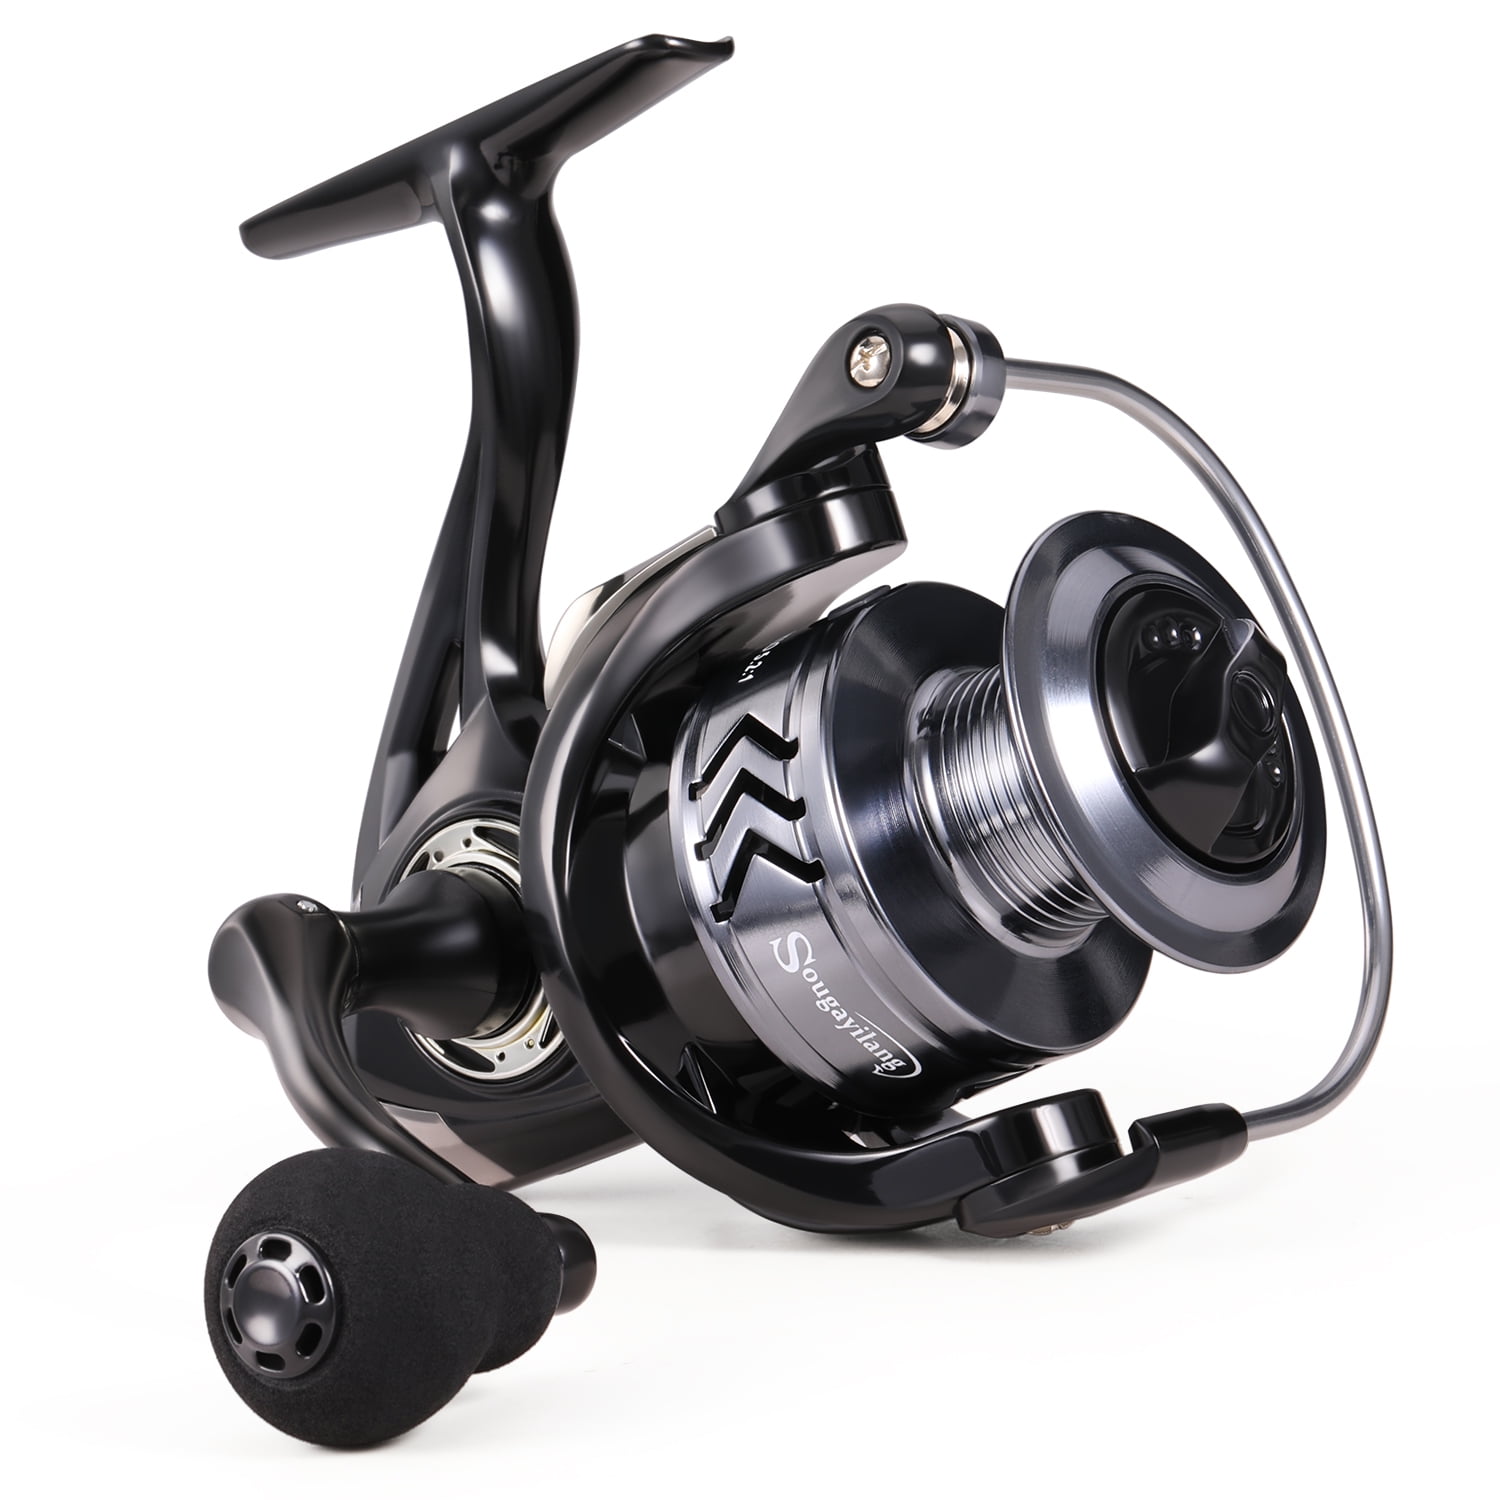 Sougayilang 2000 3000 Spinning Fishing Reels 5.2:1 High Speed Ratio Max  Drag 8kg EVA Handle Fishing Reels with Mysterious Gifts